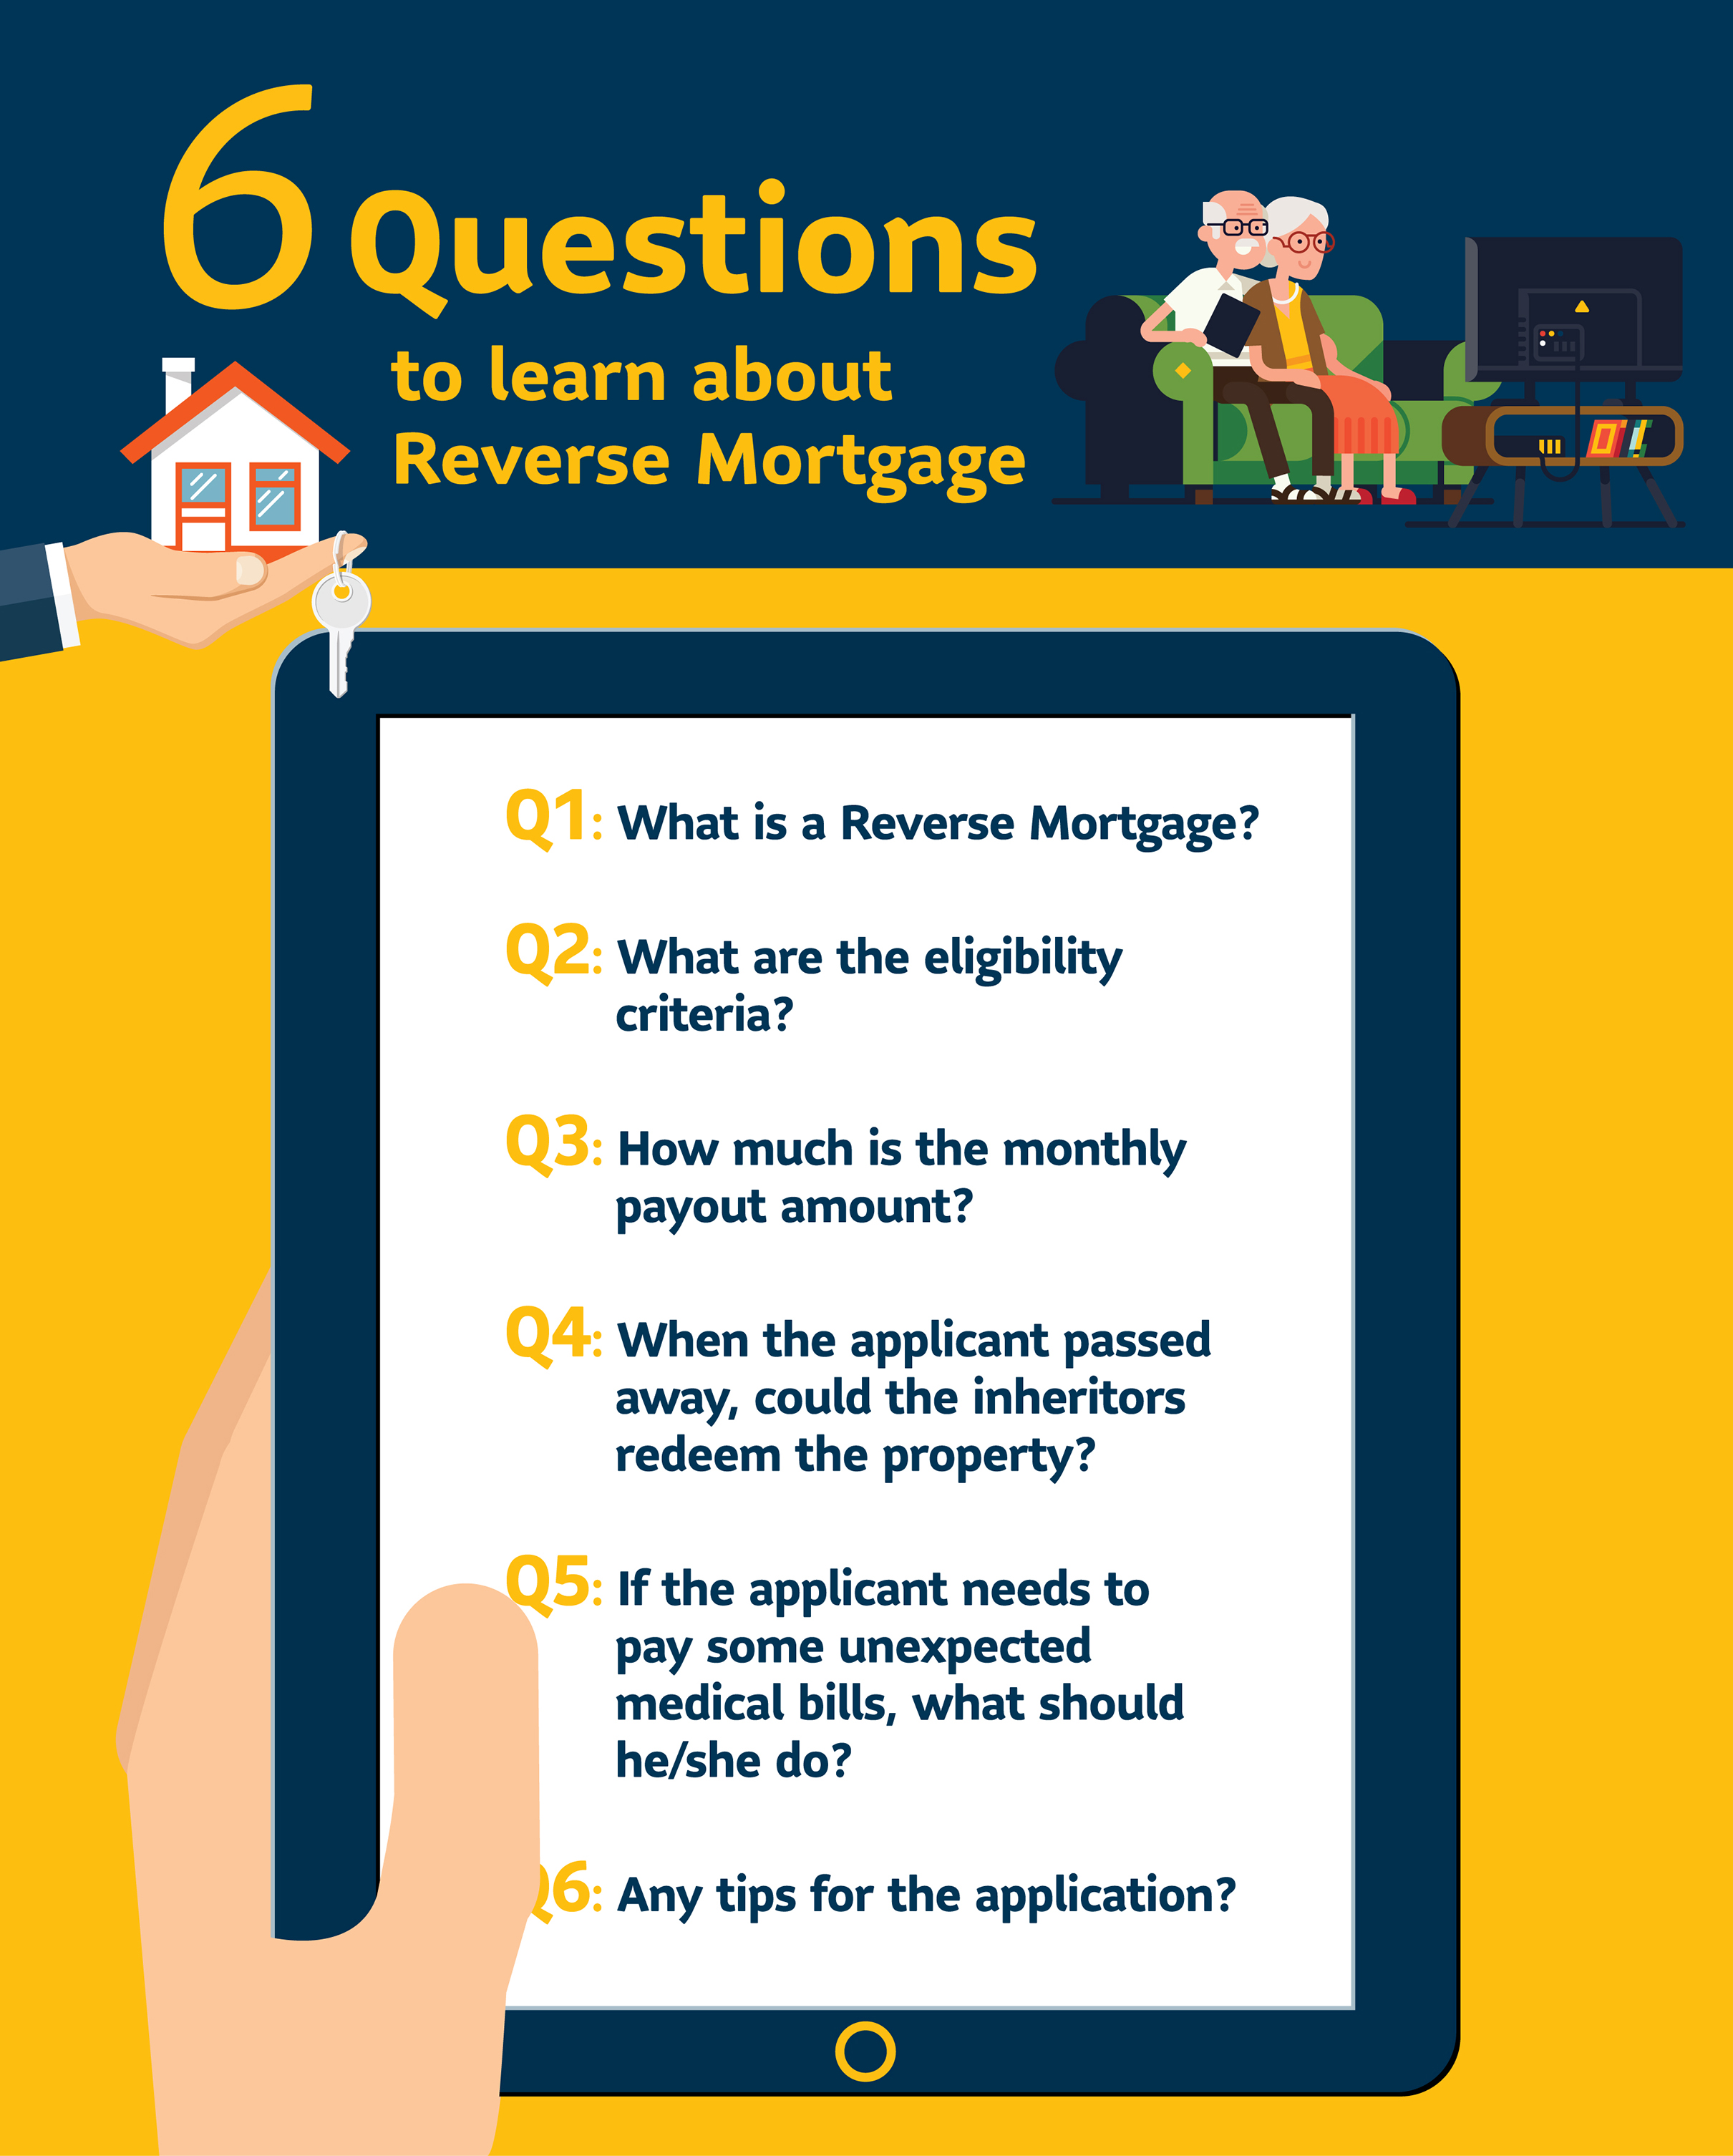 Find out If you could consider joining the Reverse Mortgage Programme by asking 6 questions.